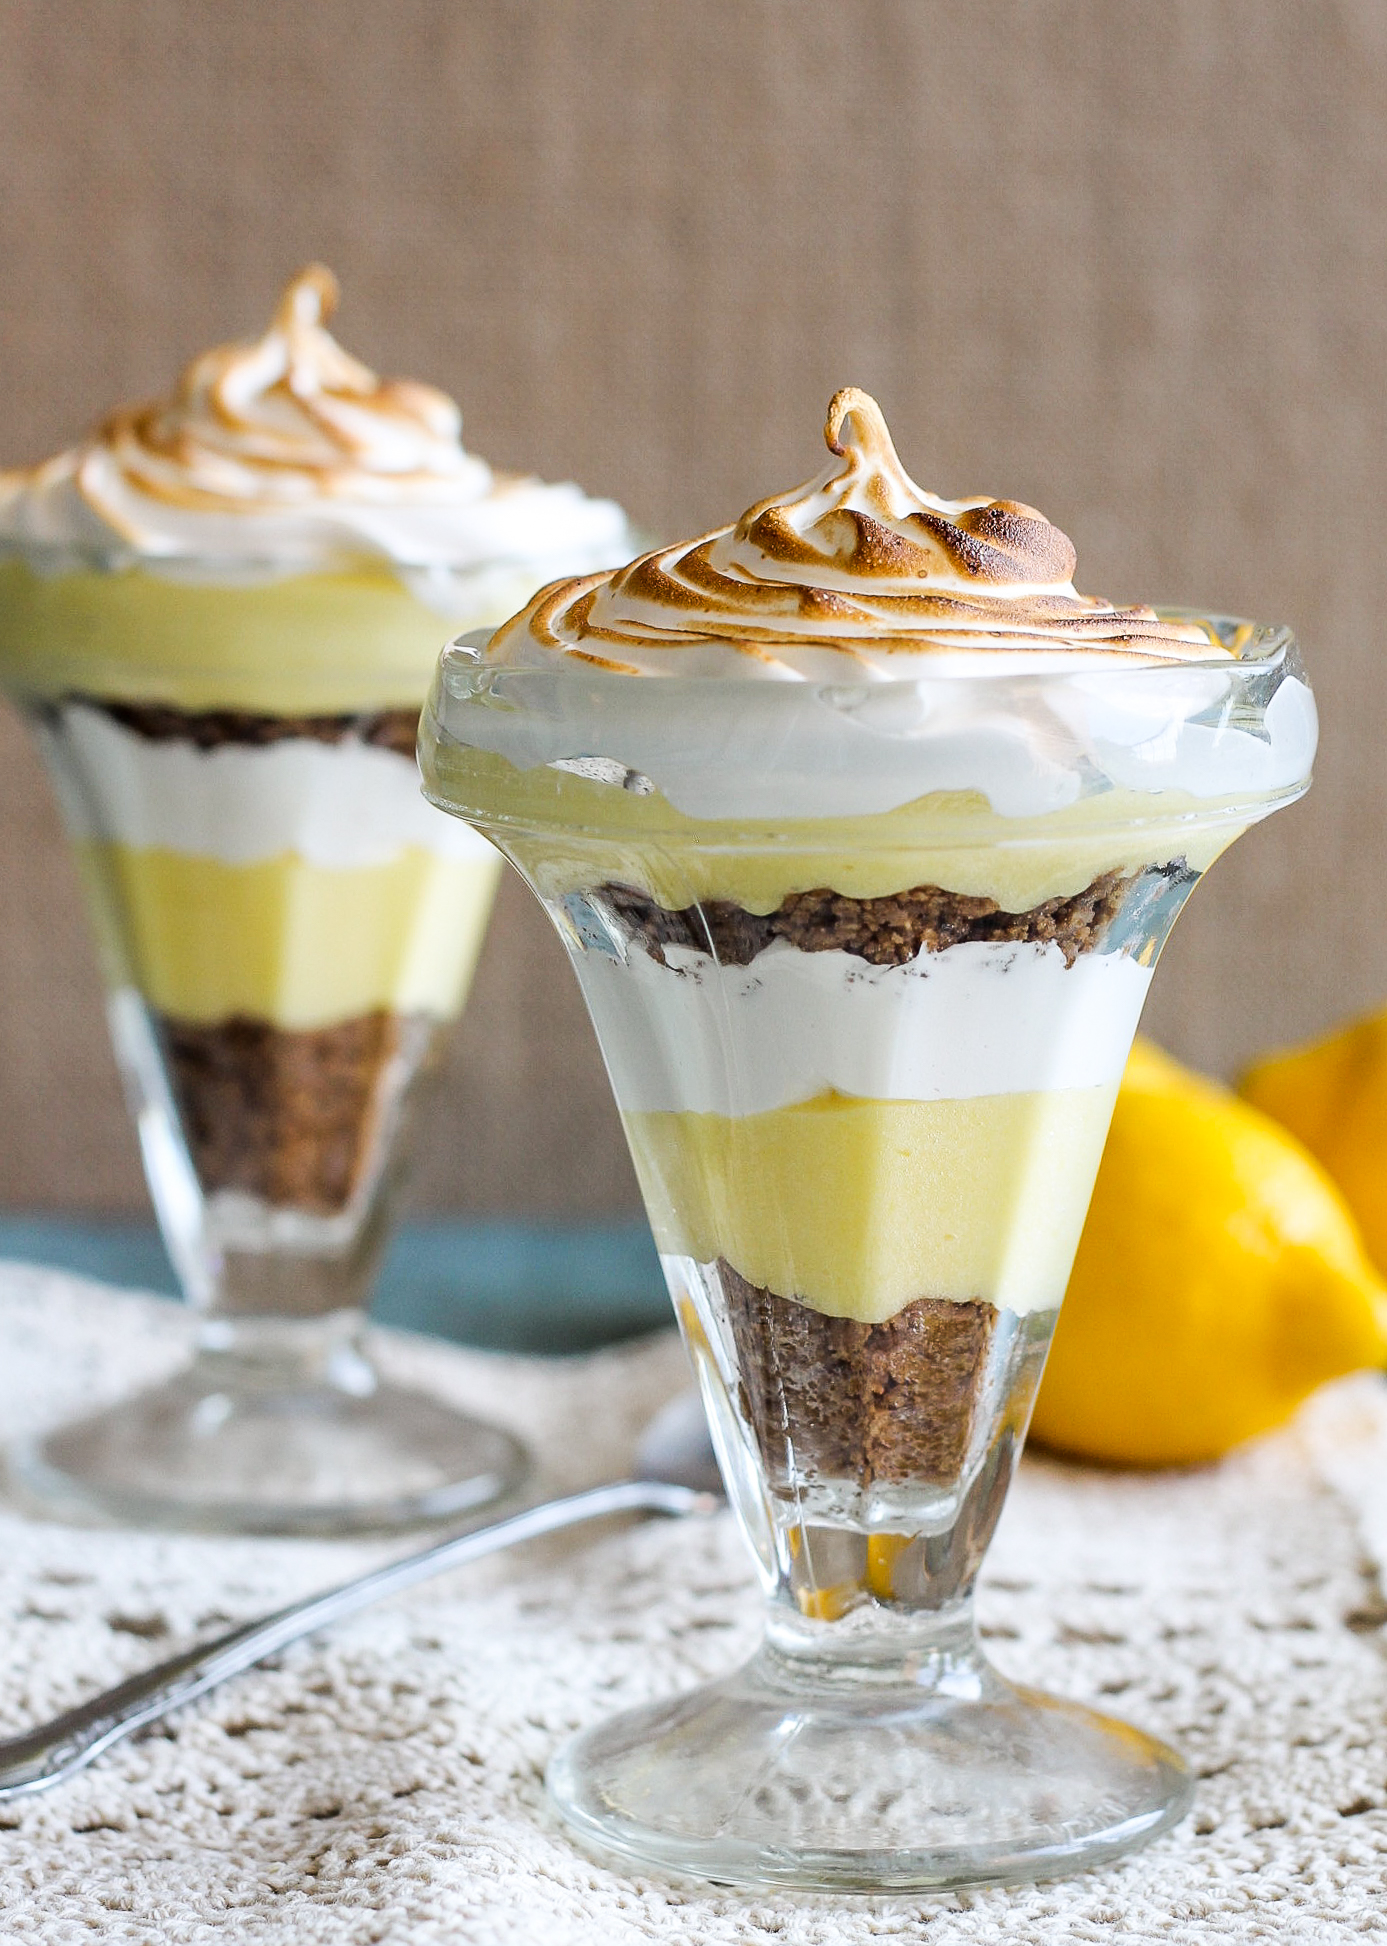 These Lemon Meringue Pie Parfaits are a no-bake dessert that will be your new summer favorite! Lemon curd, graham cracker crumbs, and meringue makes the best individual treats.